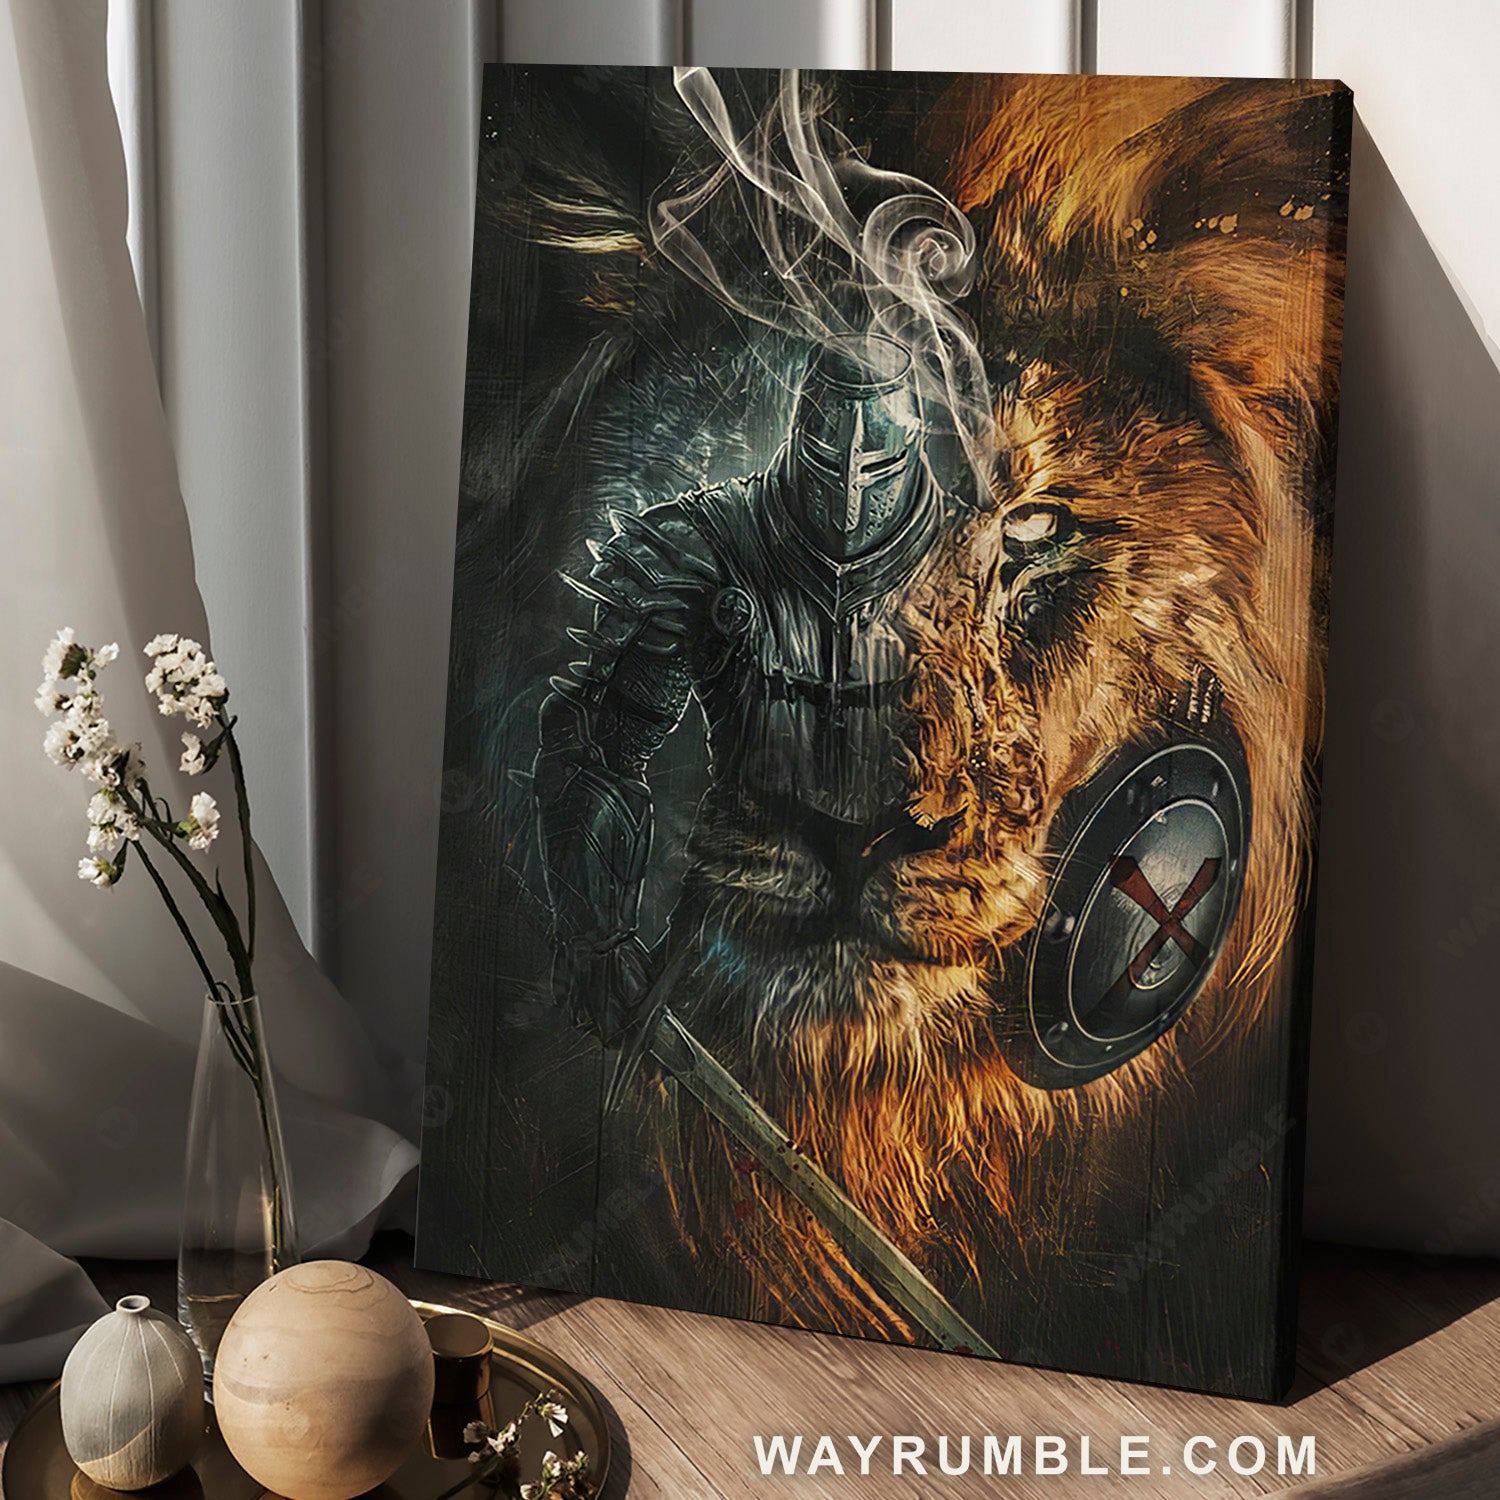 Witcher Warrior Wild Hunt Game Wall Art Pictures Posters Canvas